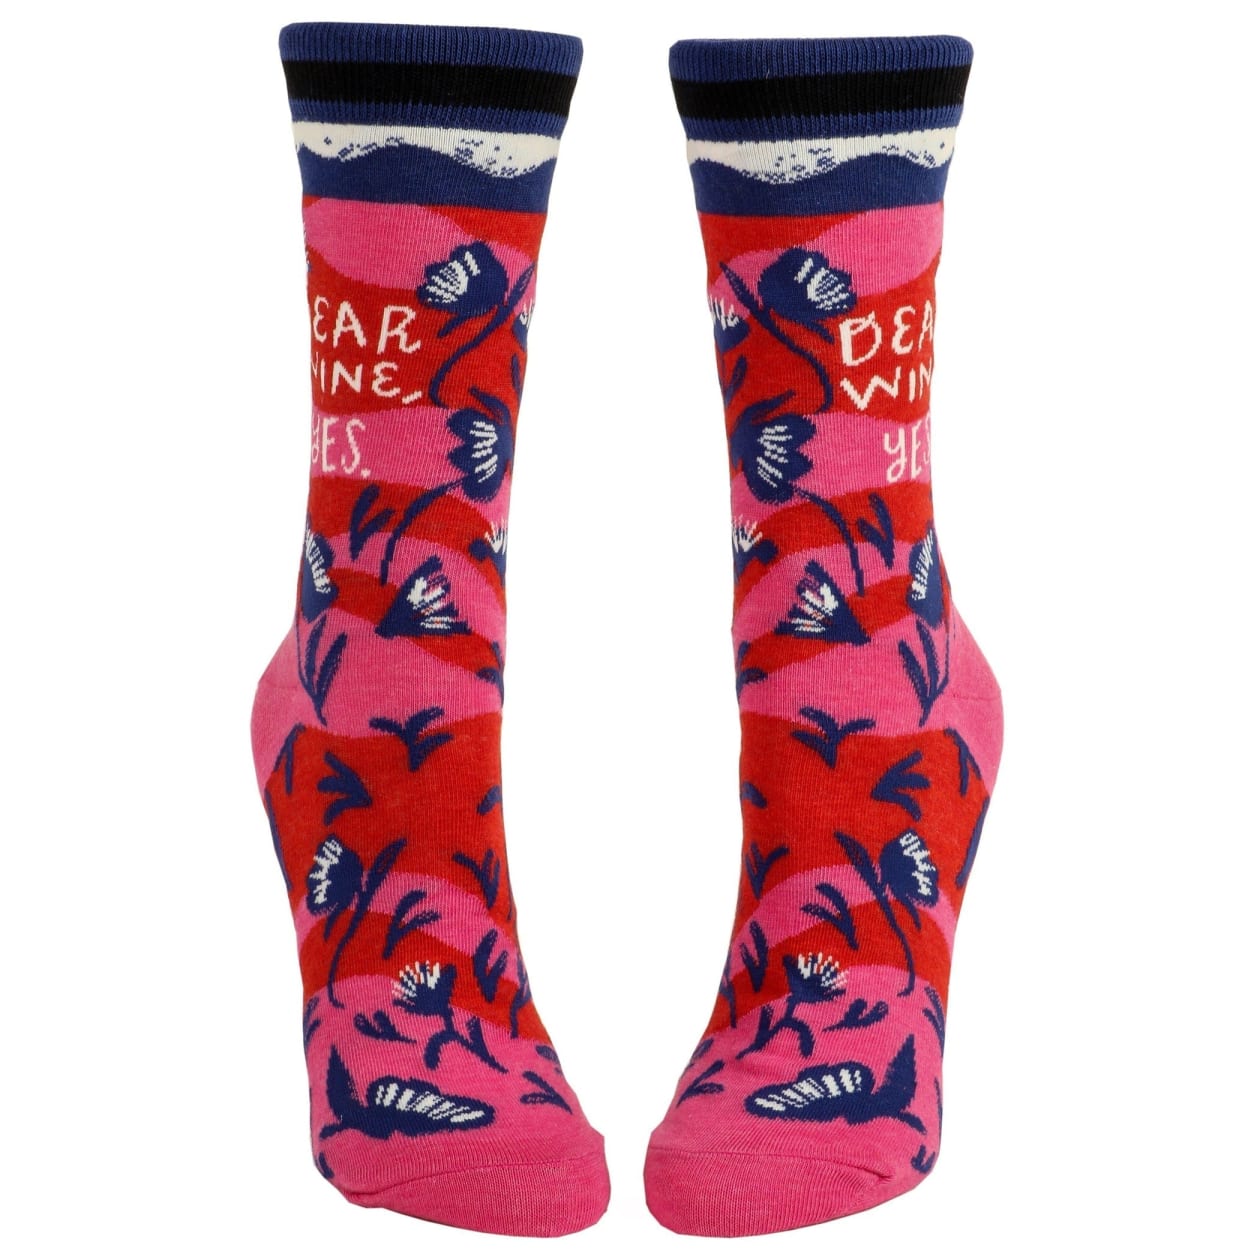 Dear Wine, Yes Women's Crew Socks in Pink and Red | BlueQ at GetBullish